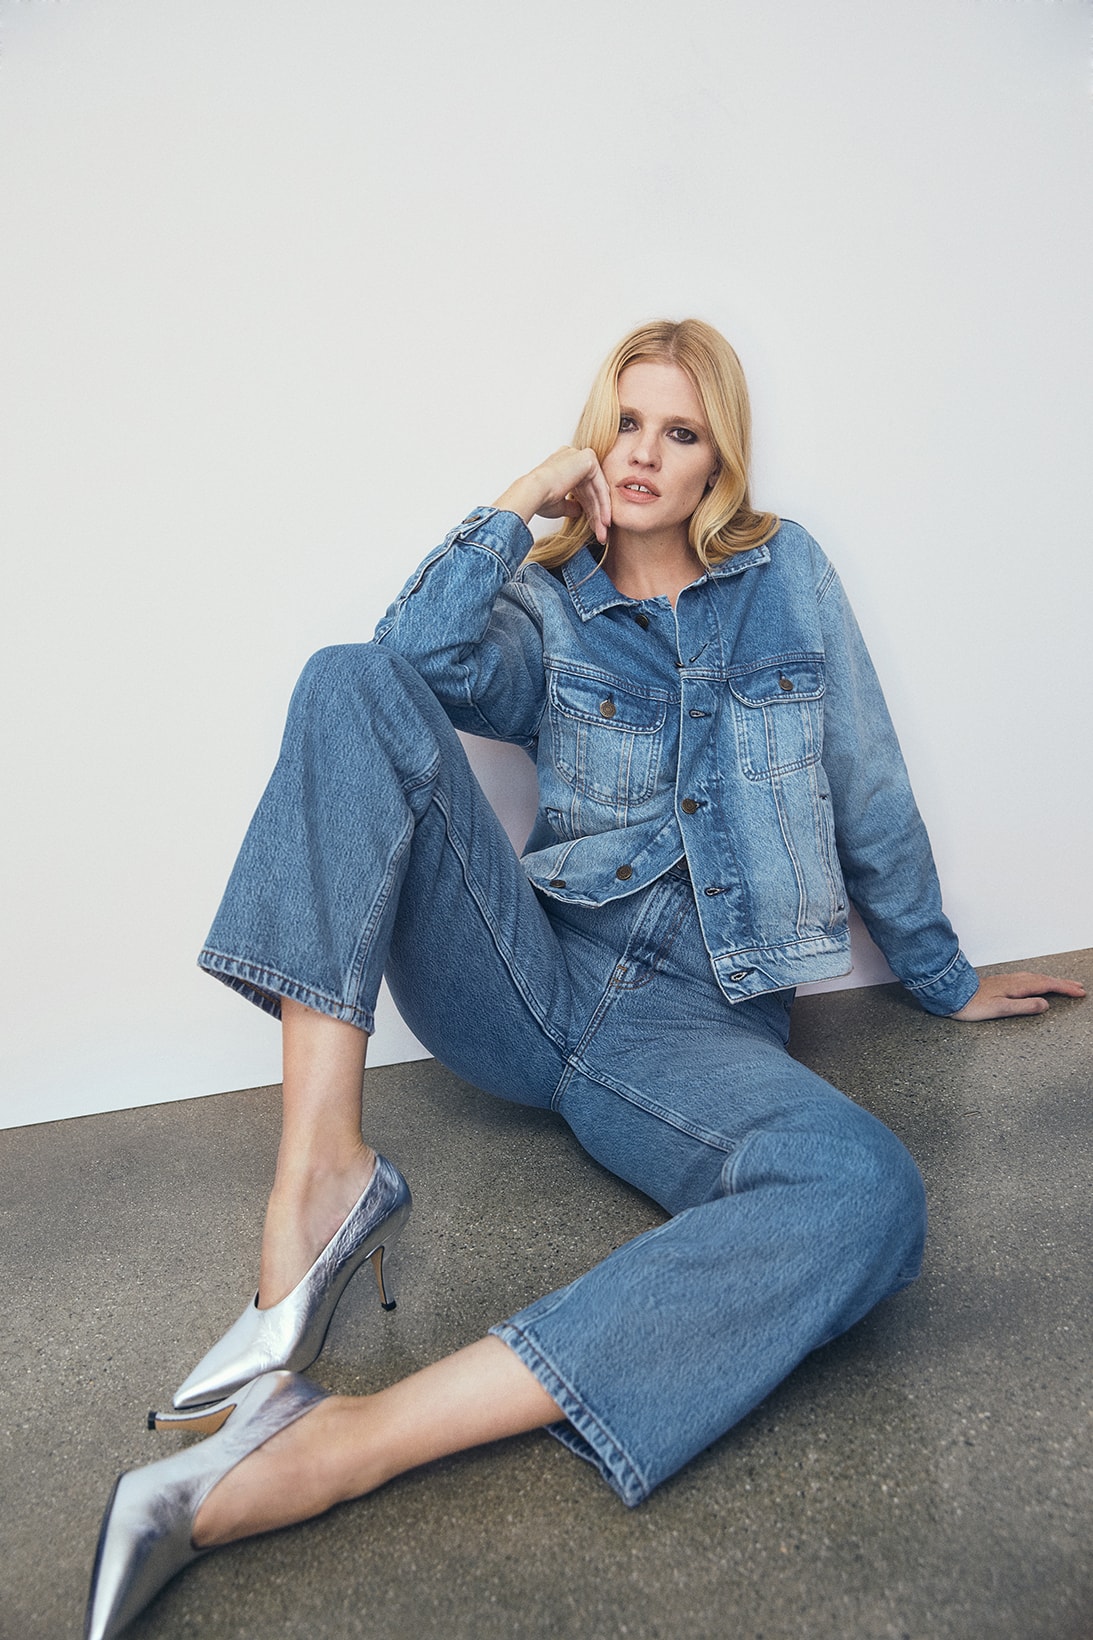 reformation fall ref jeans denim sustainability eco friendly collection lara stone fashion clothes dresses jackets jumpsuits